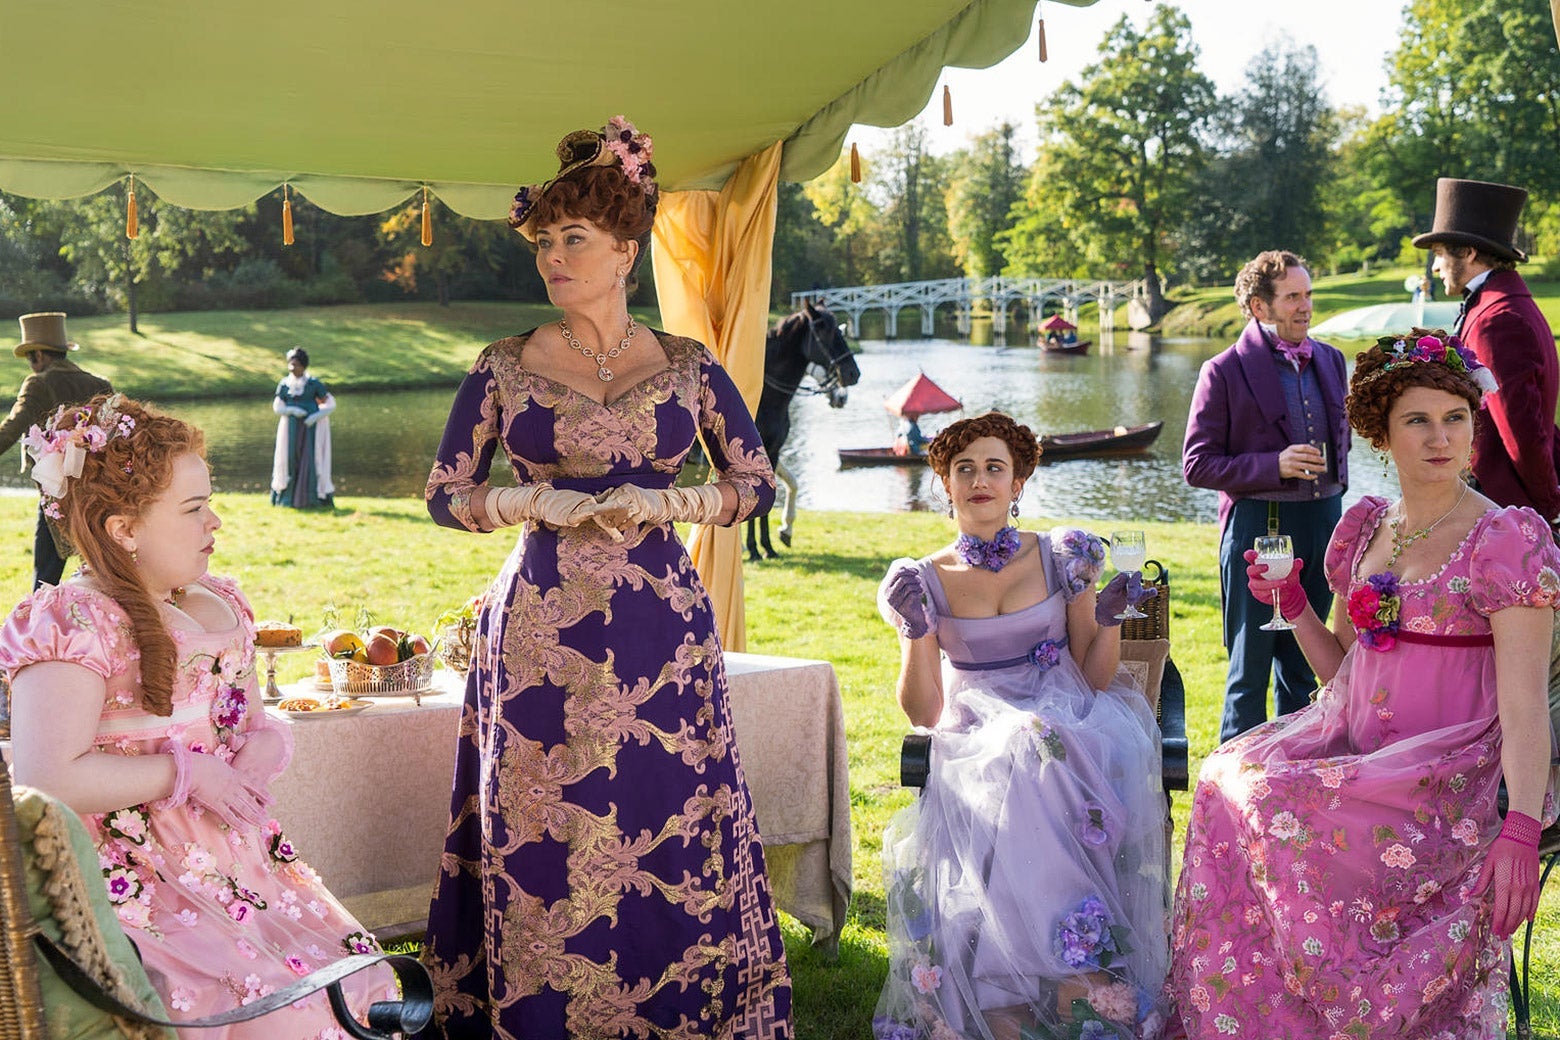 A garden party scene. From left to right: Nicola Coughlan as Penelope Featherington wears a light pink gown with flowers; Polly Walker as Lady Portia Featherington wears a deep purple gown with a bold repeating pattern; Harriet Cains as Philippa Featherington wears a satiny lavender gown with a floral choker and a sheath layered skirt; Bessie Carter as Prudence Featherington wears a bright pink gown with flowers.